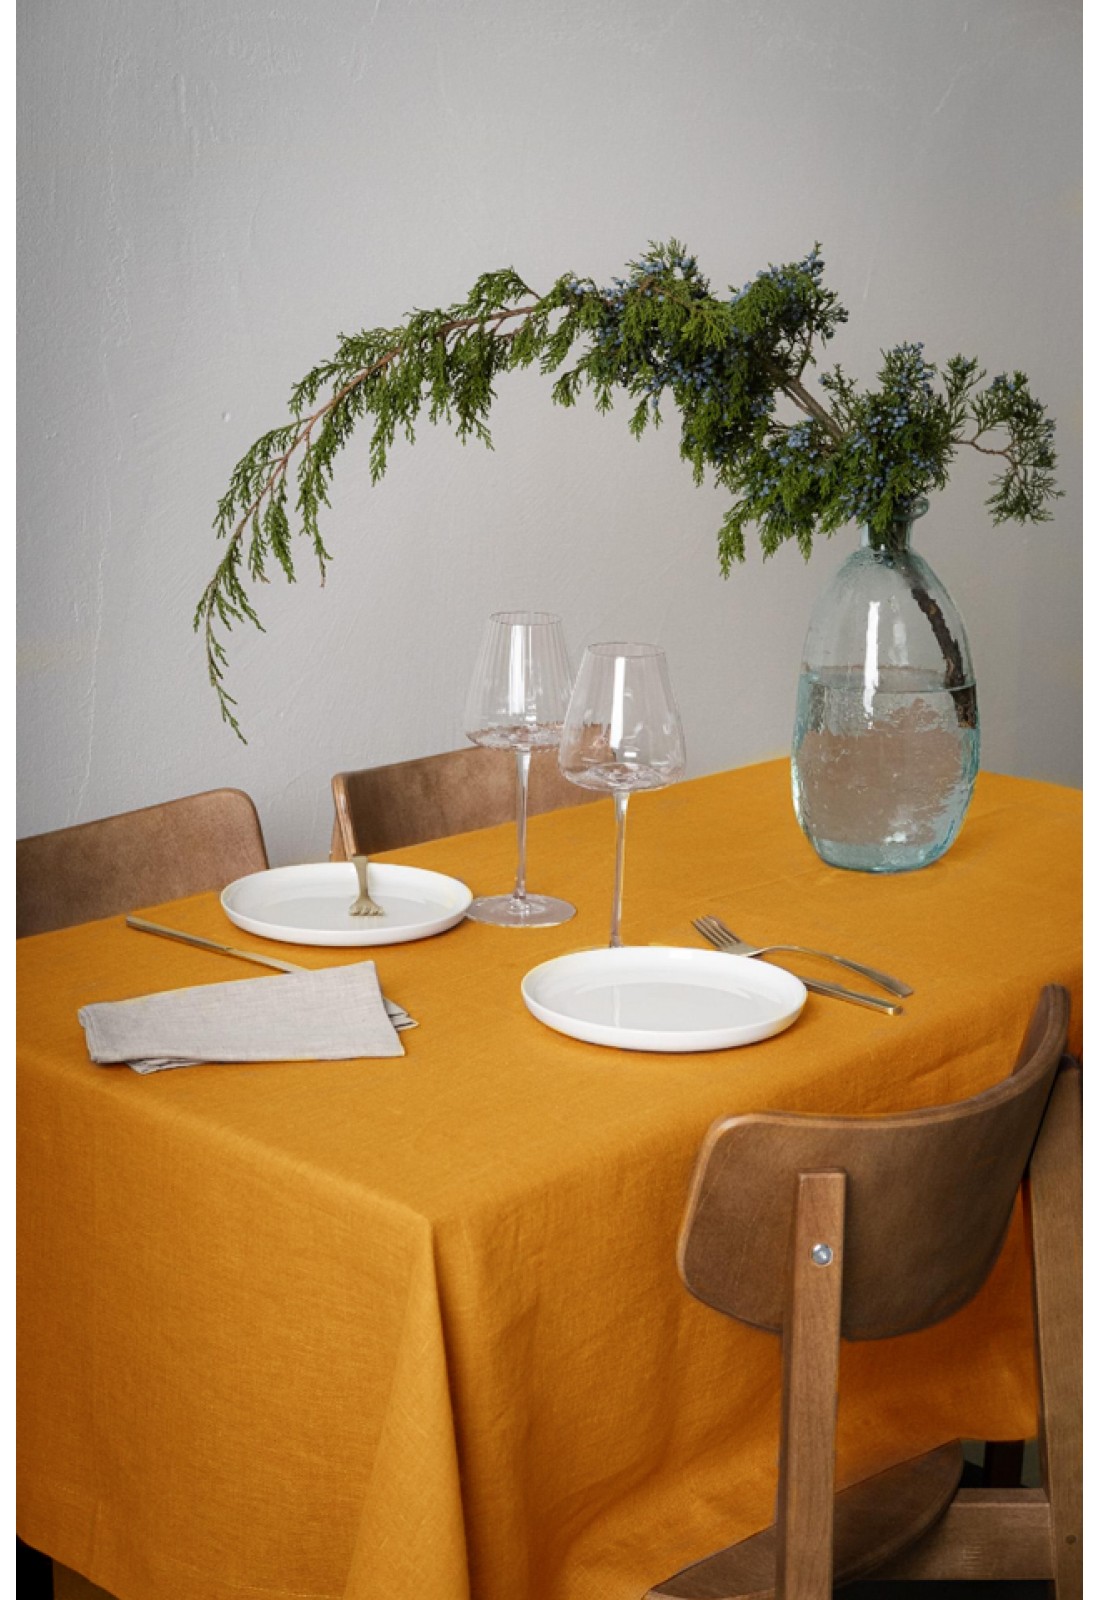 https://www.touchablelinen.com/image/cache/catalog/products/59/Linen-tablecloth-in-Mustard-yellow-2-1100x1600.jpg